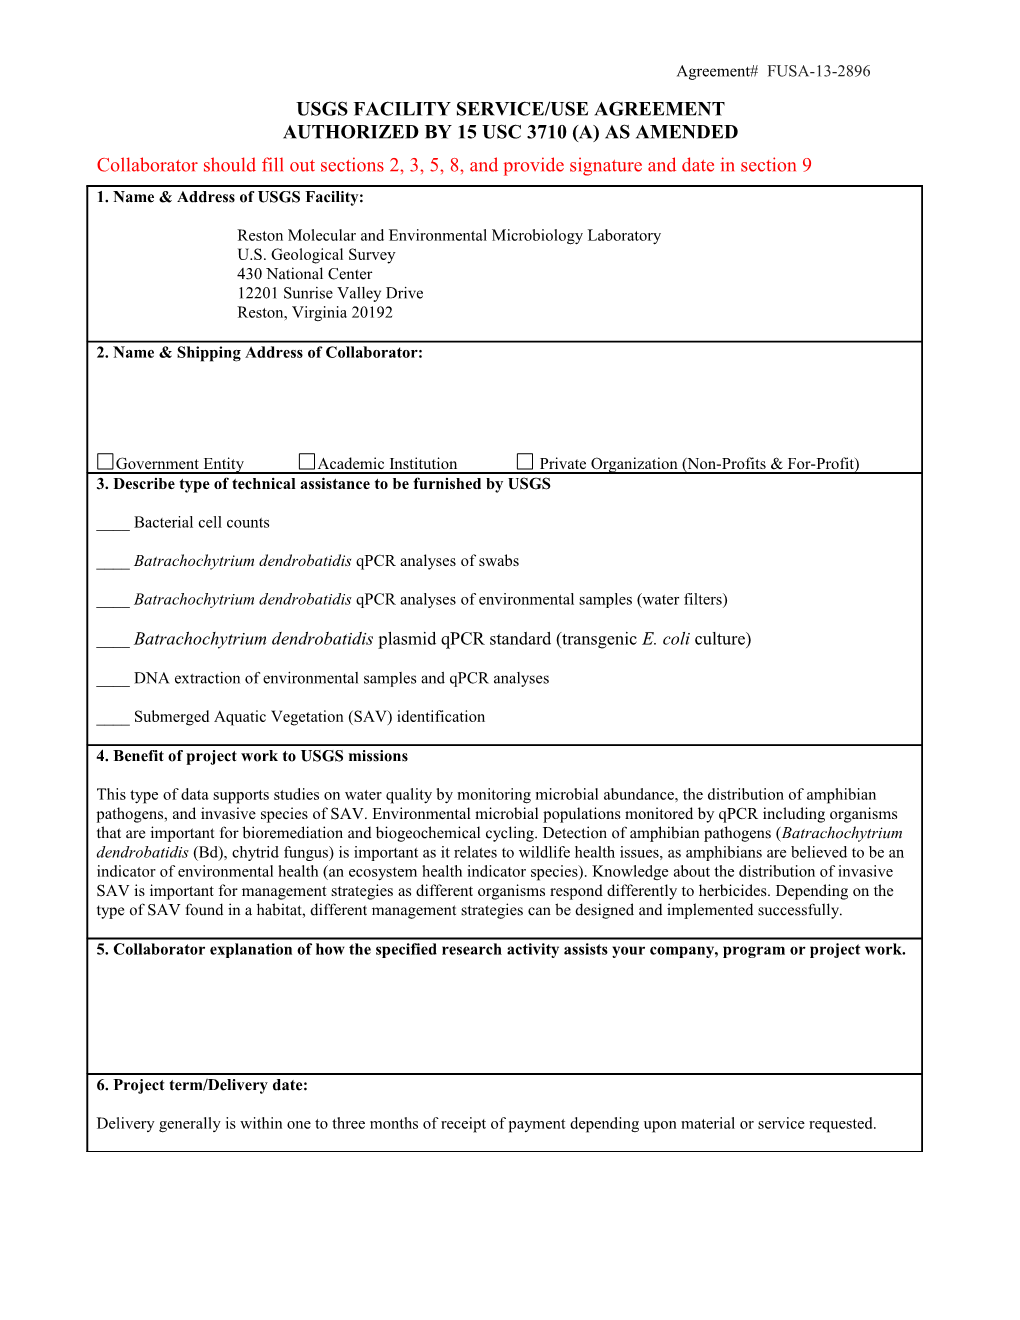 USGS Facility Service/Use Agreement